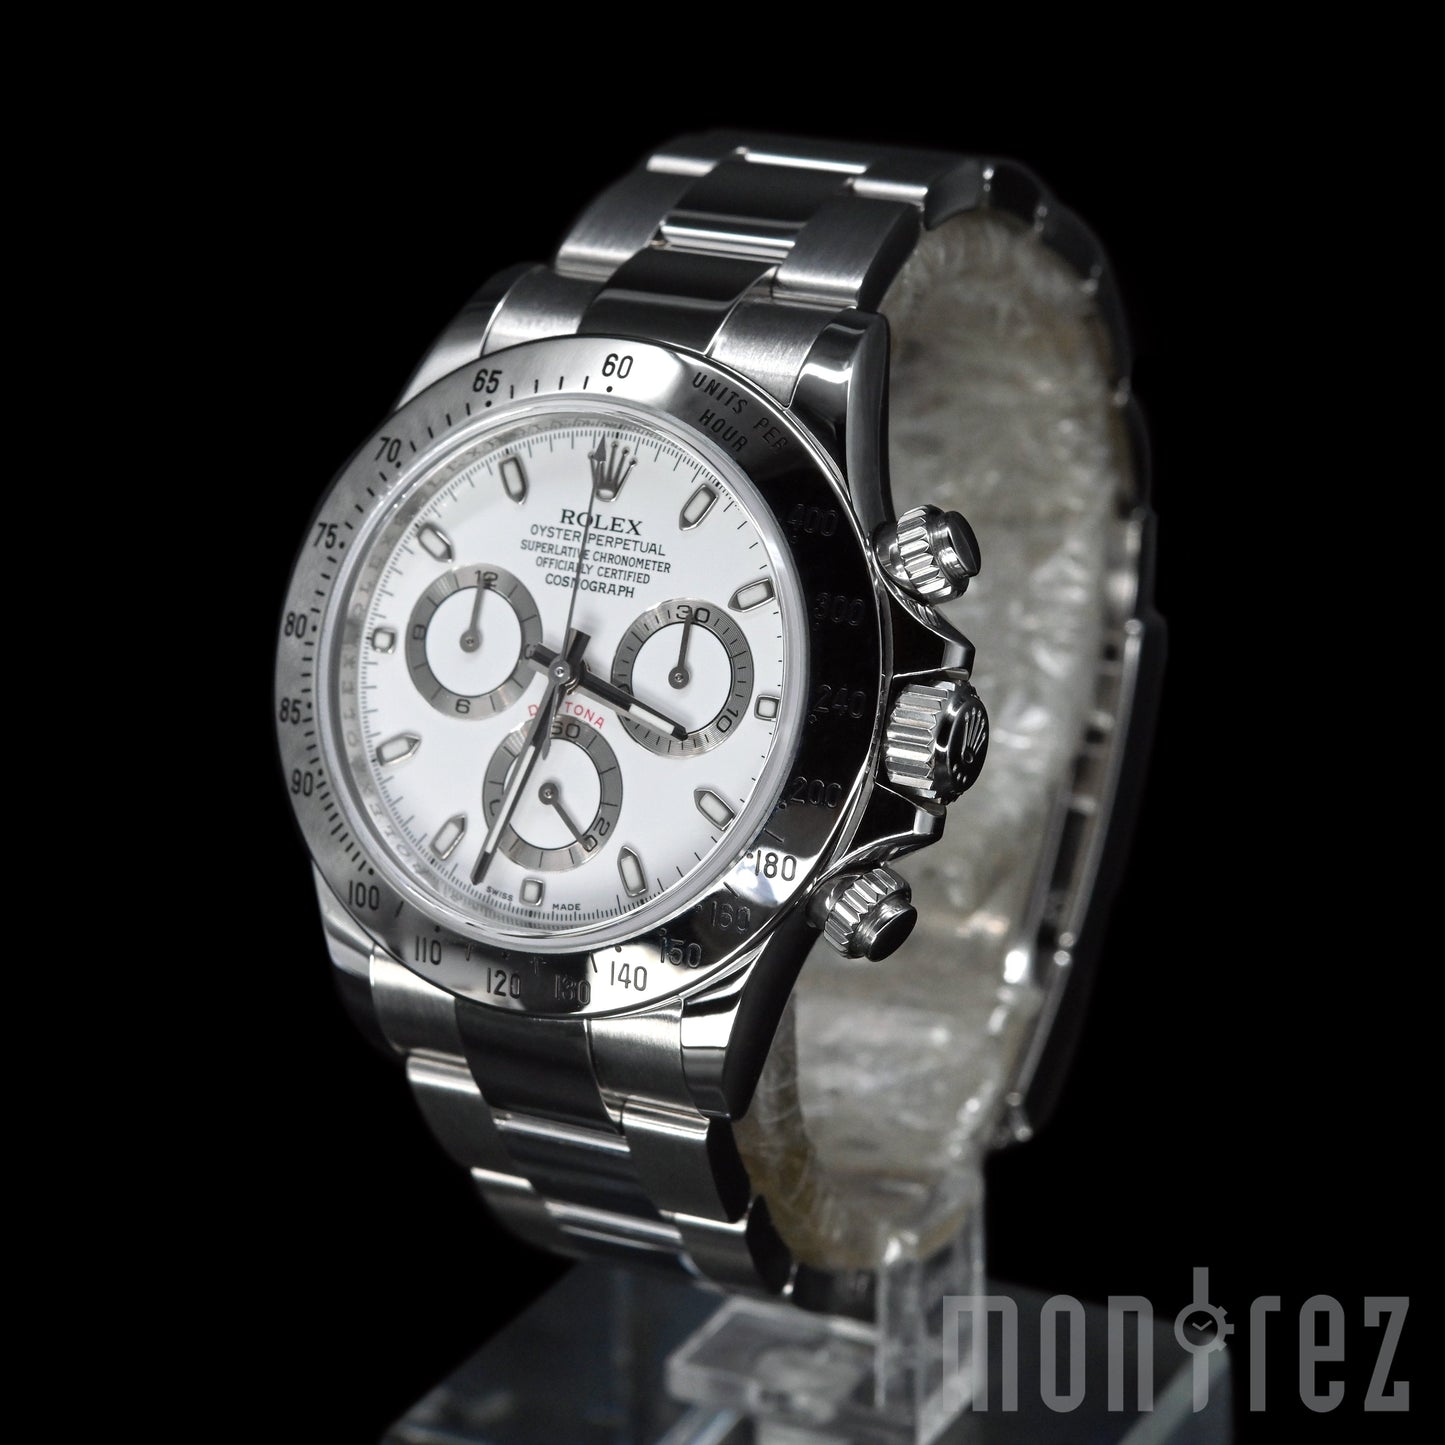 [New Old Stock] Rolex Cosmograph Daytona 40mm 116520 White Dial (Out of Production)